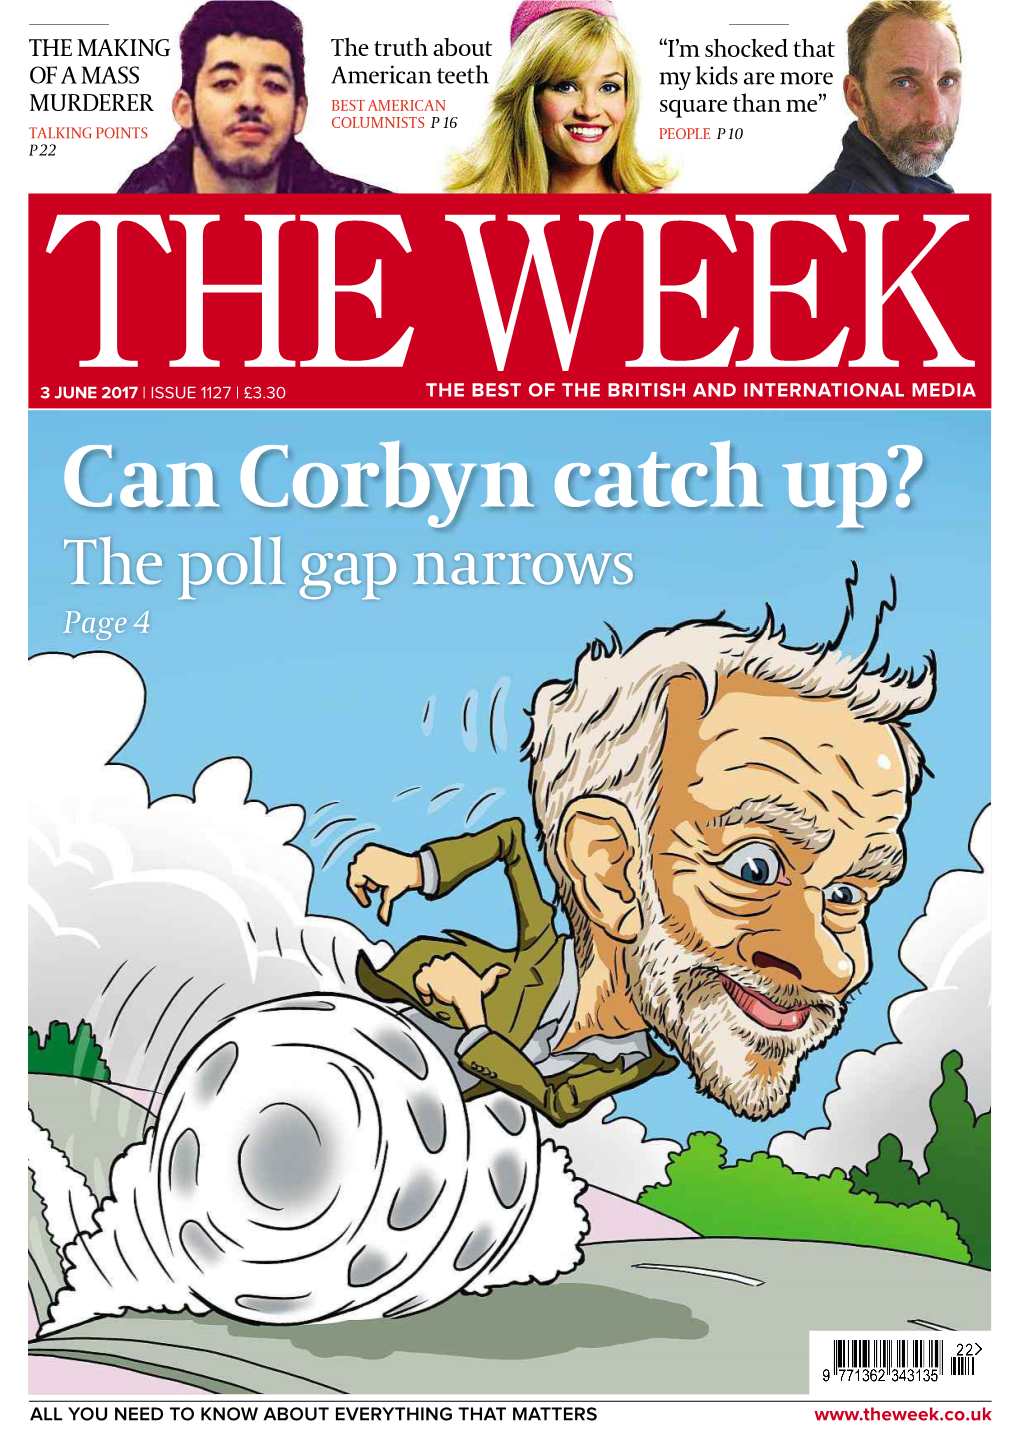 Cancorbyncatchup?